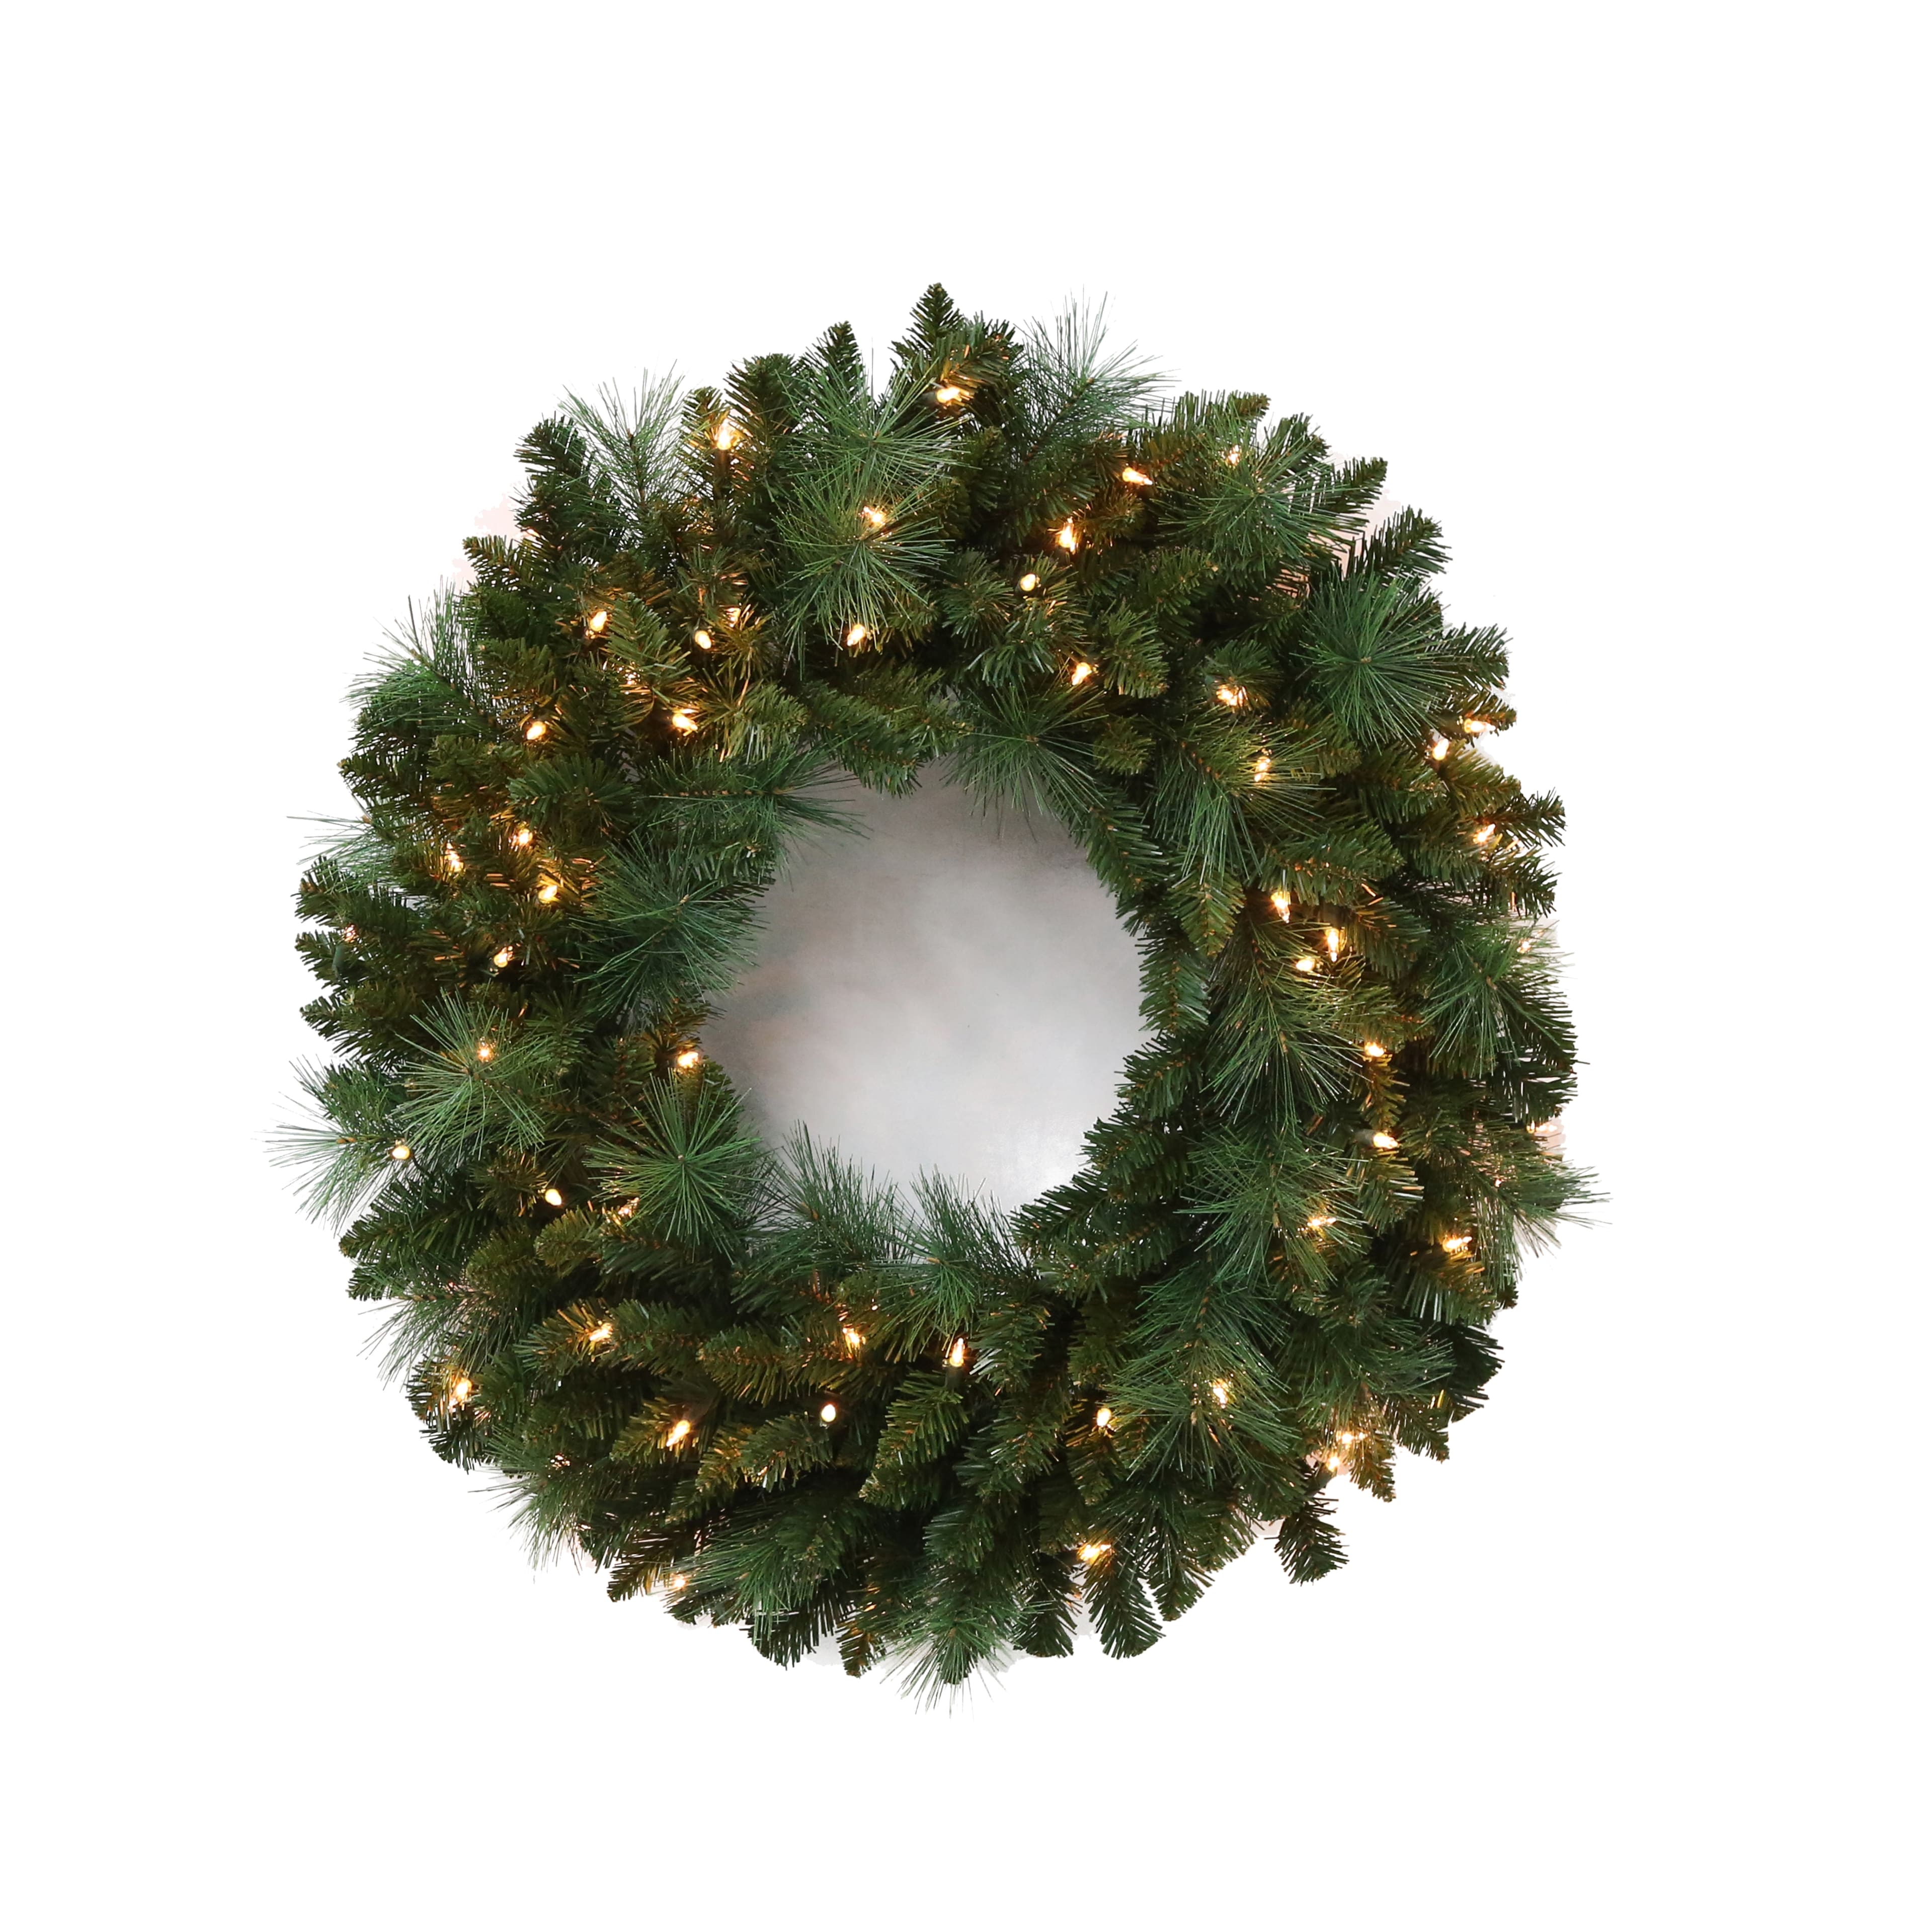 16 Wire Wreath Frame with Pine Ties by Ashland®